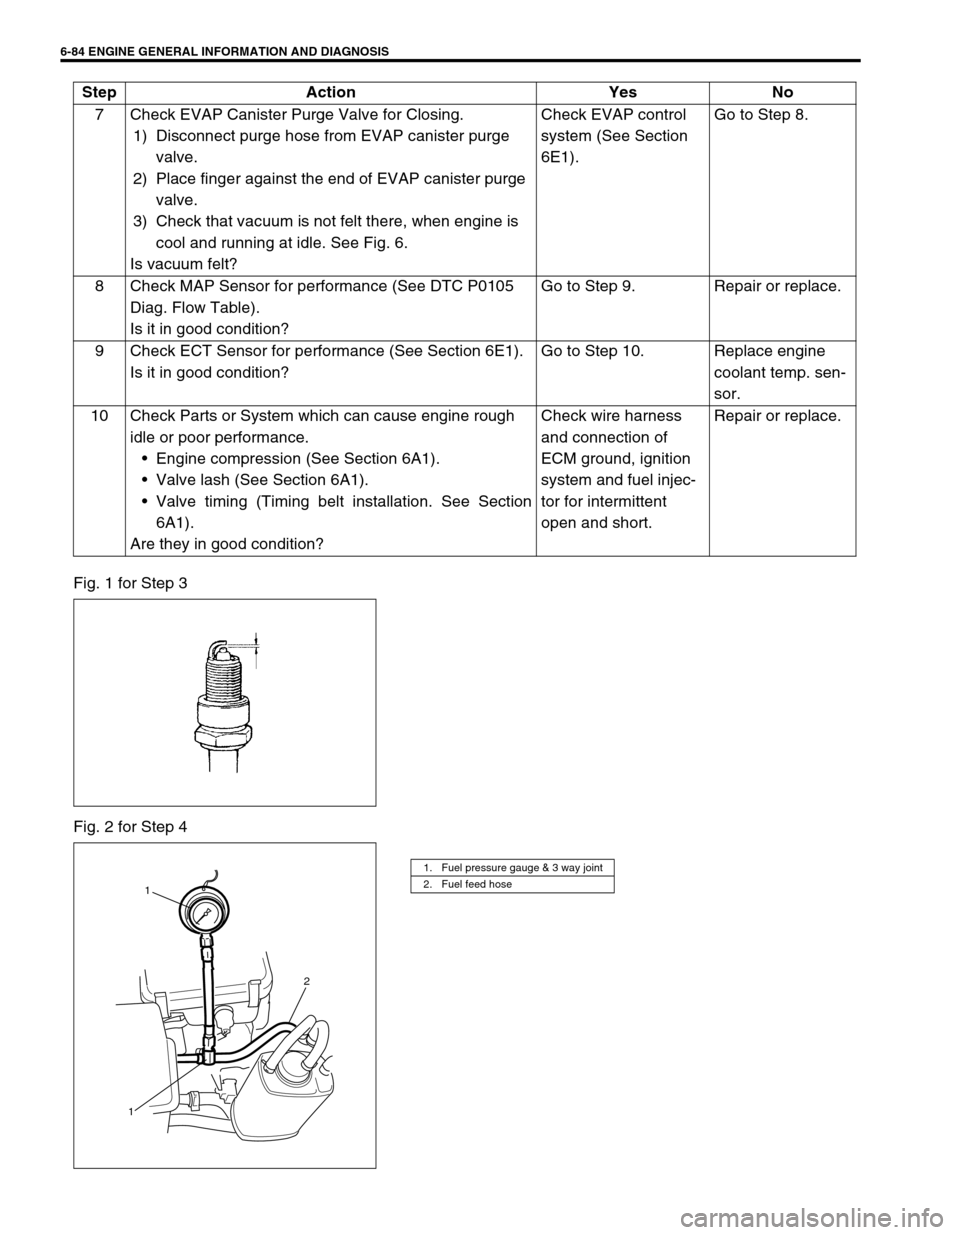 SUZUKI SWIFT 2000 1.G RG413 Service Owners Manual 6-84 ENGINE GENERAL INFORMATION AND DIAGNOSIS
Fig. 1 for Step 3
Fig. 2 for Step 47 Check EVAP Canister Purge Valve for Closing.
1) Disconnect purge hose from EVAP canister purge 
valve.
2) Place finge